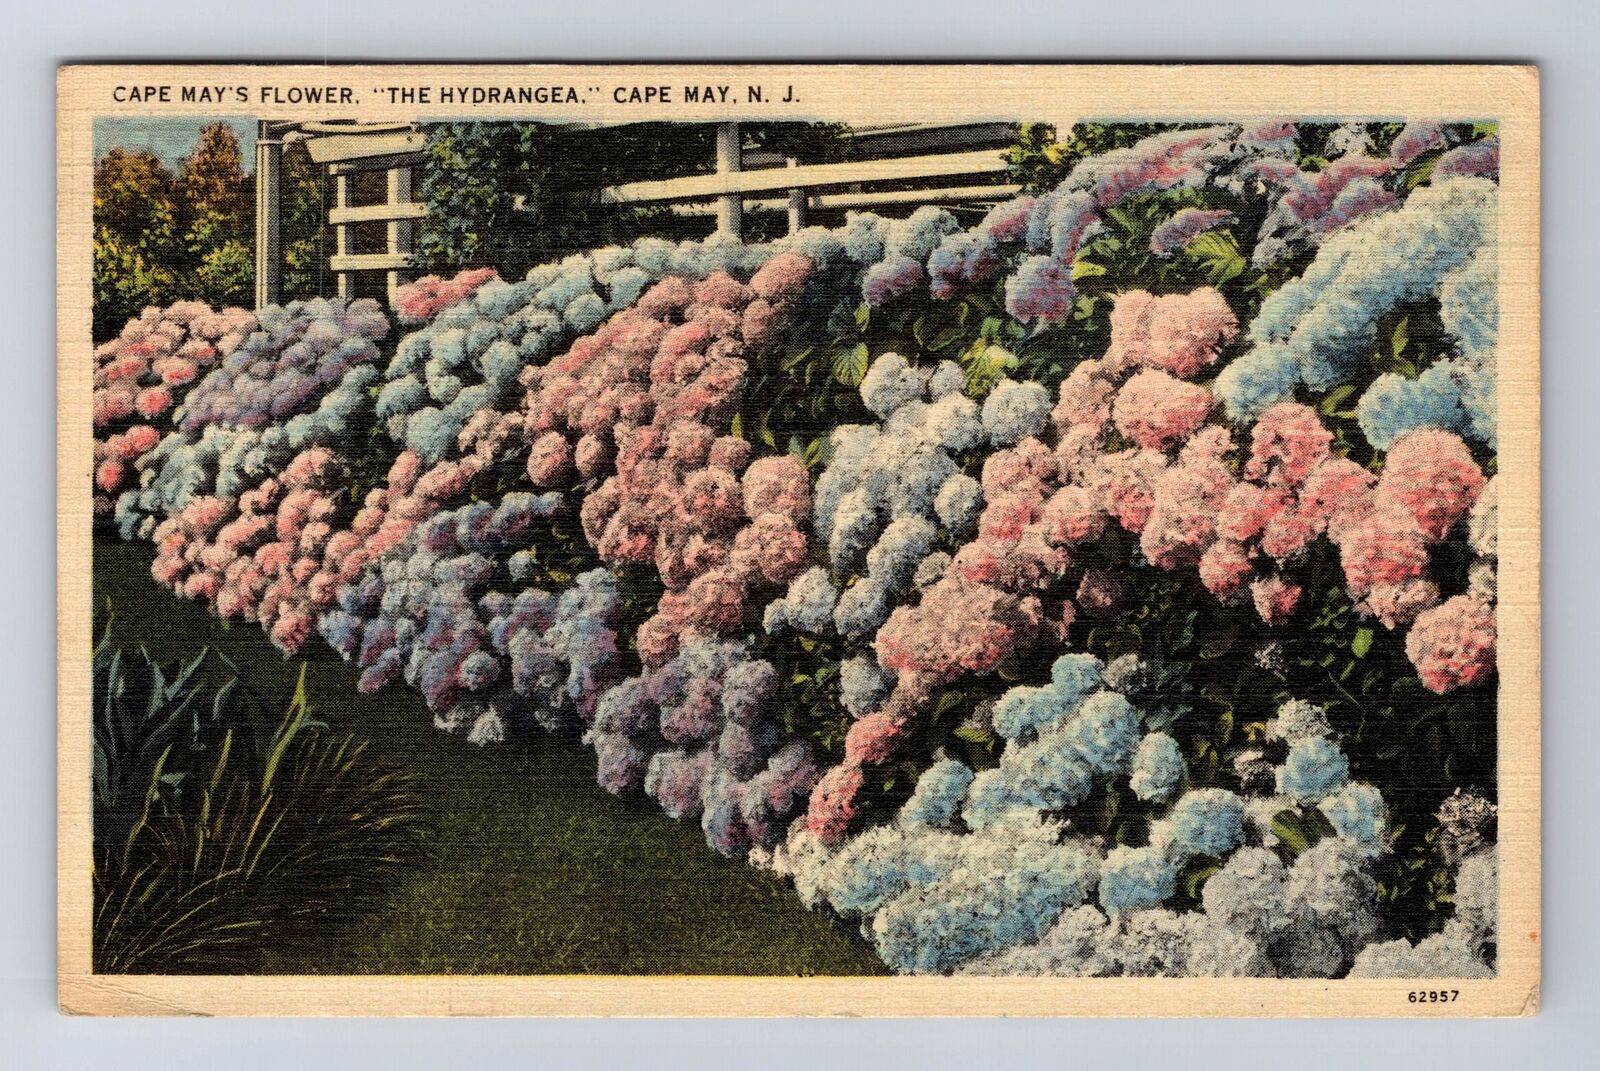 Cape May NJ-New Jersey, Cape May's Flower The Hydrangea, Vintage c1941 Postcard